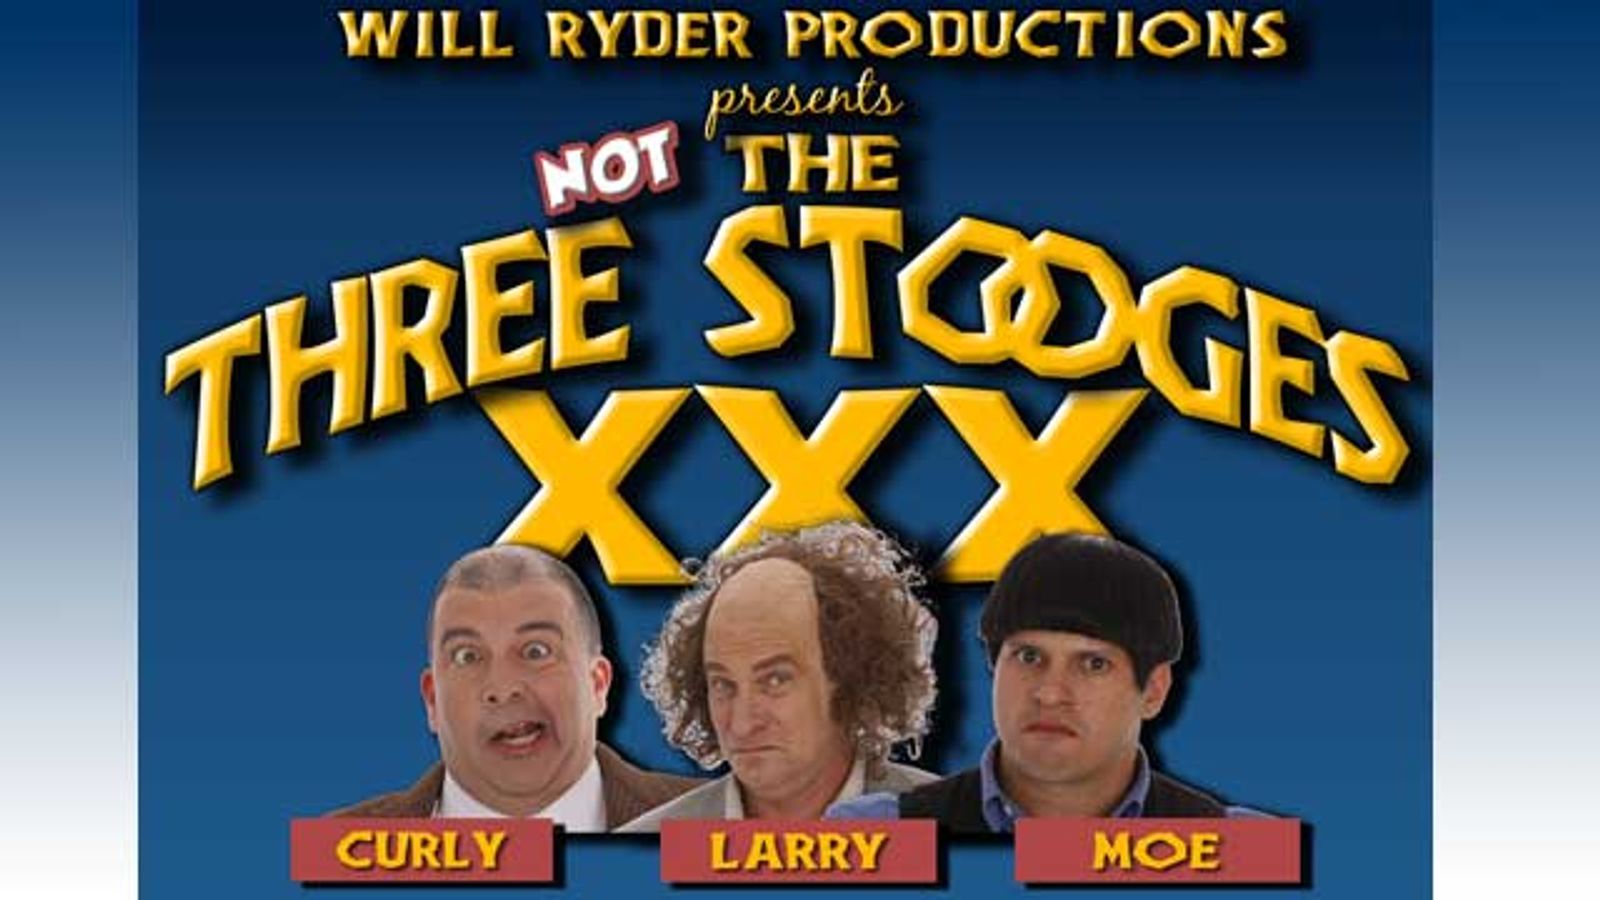 Will Ryder's 'Not The Three Stooges XXX' May Wind Up in Court